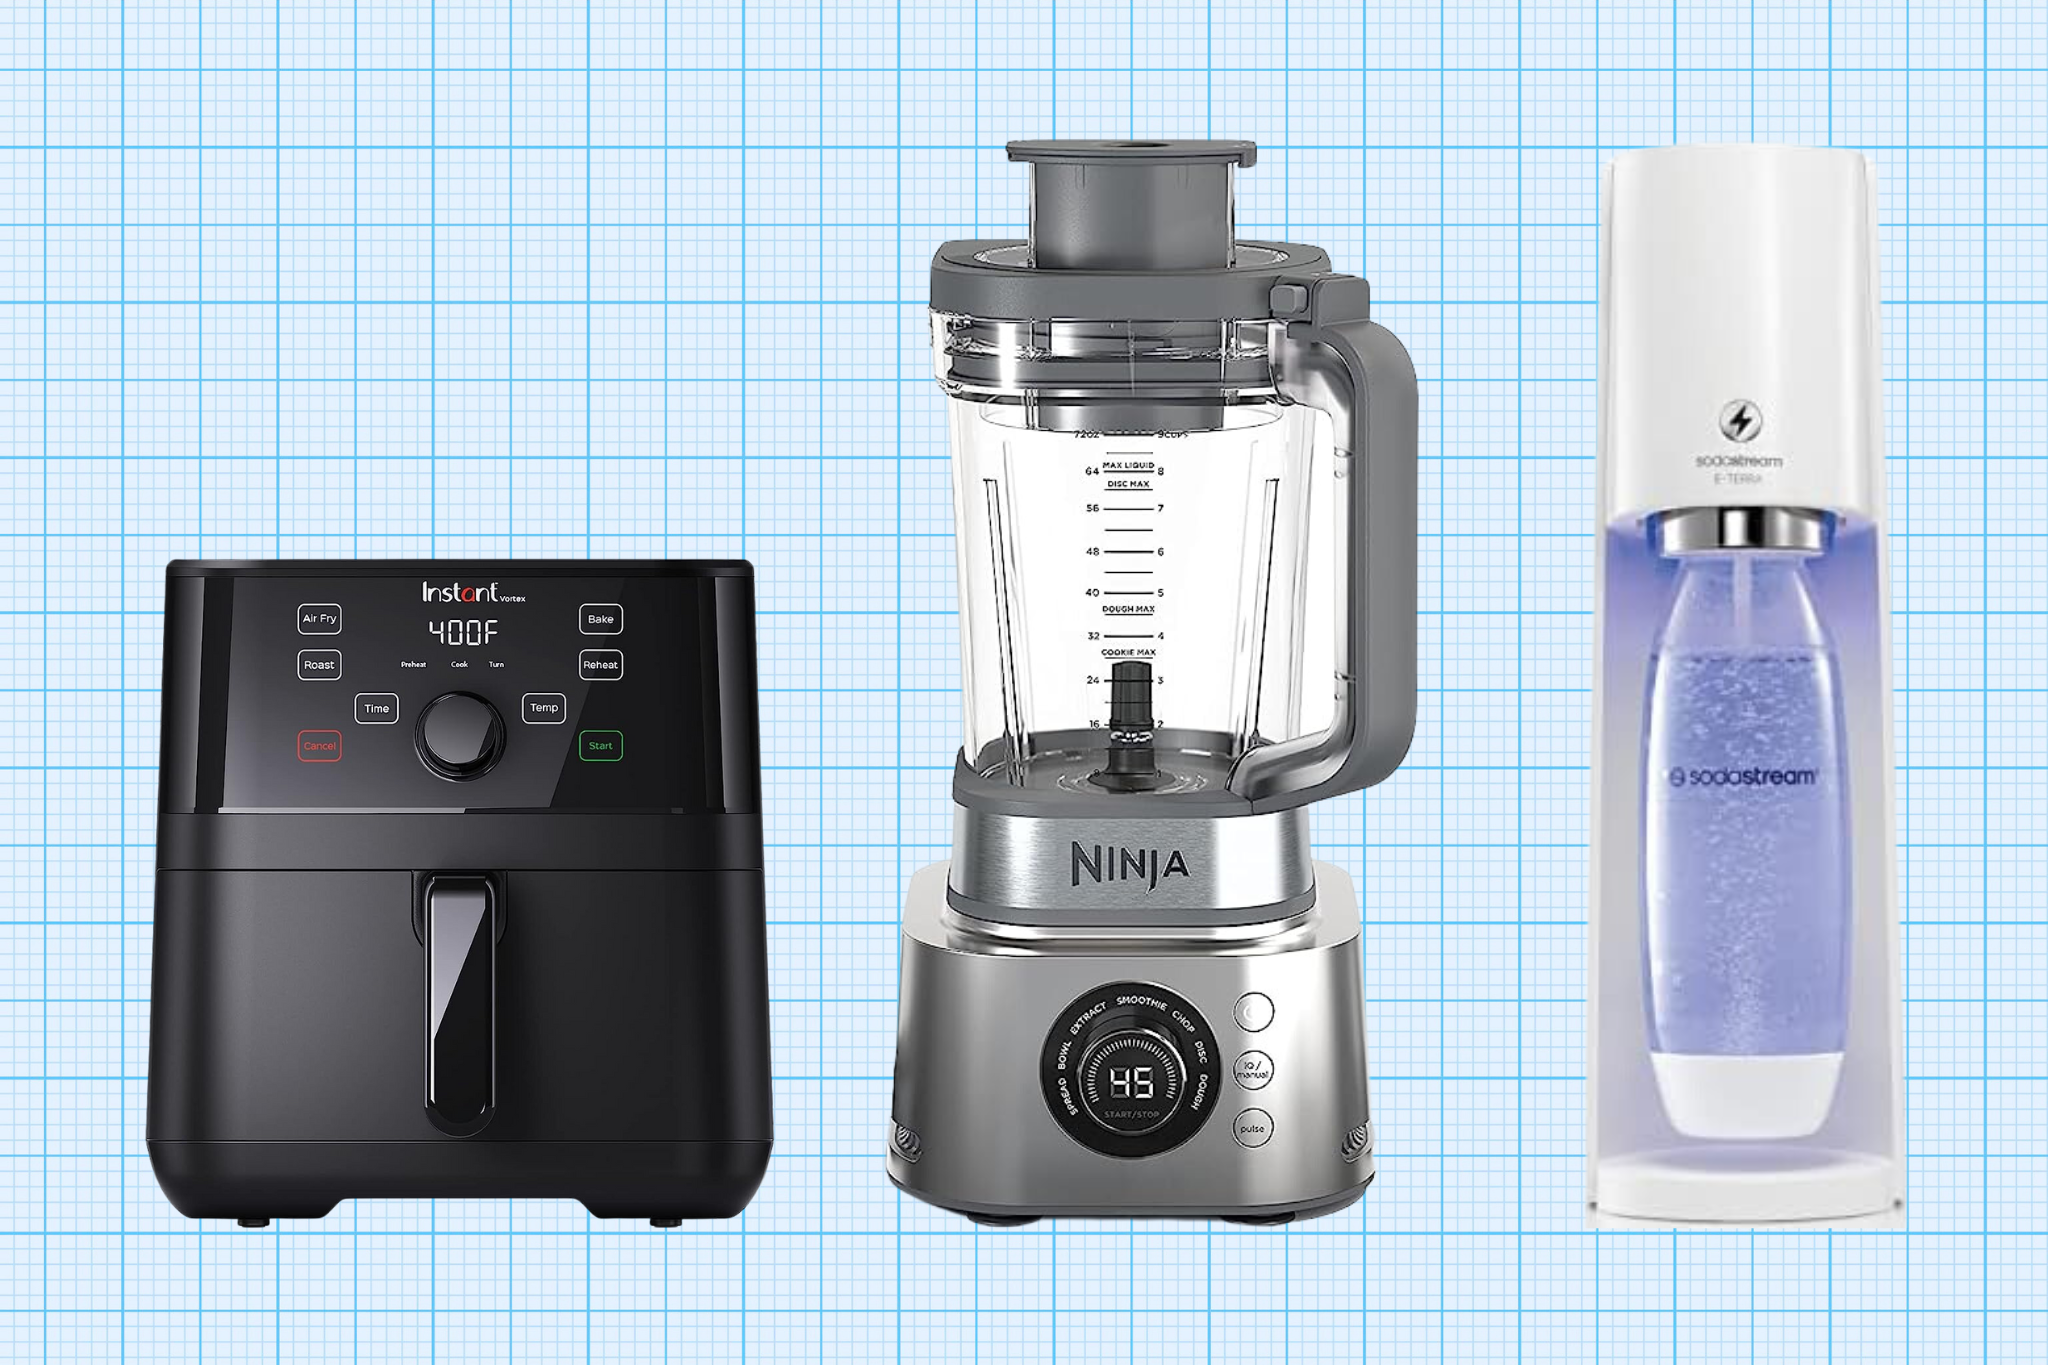 Prime Day Deals on Things for Your Home and Kitchen